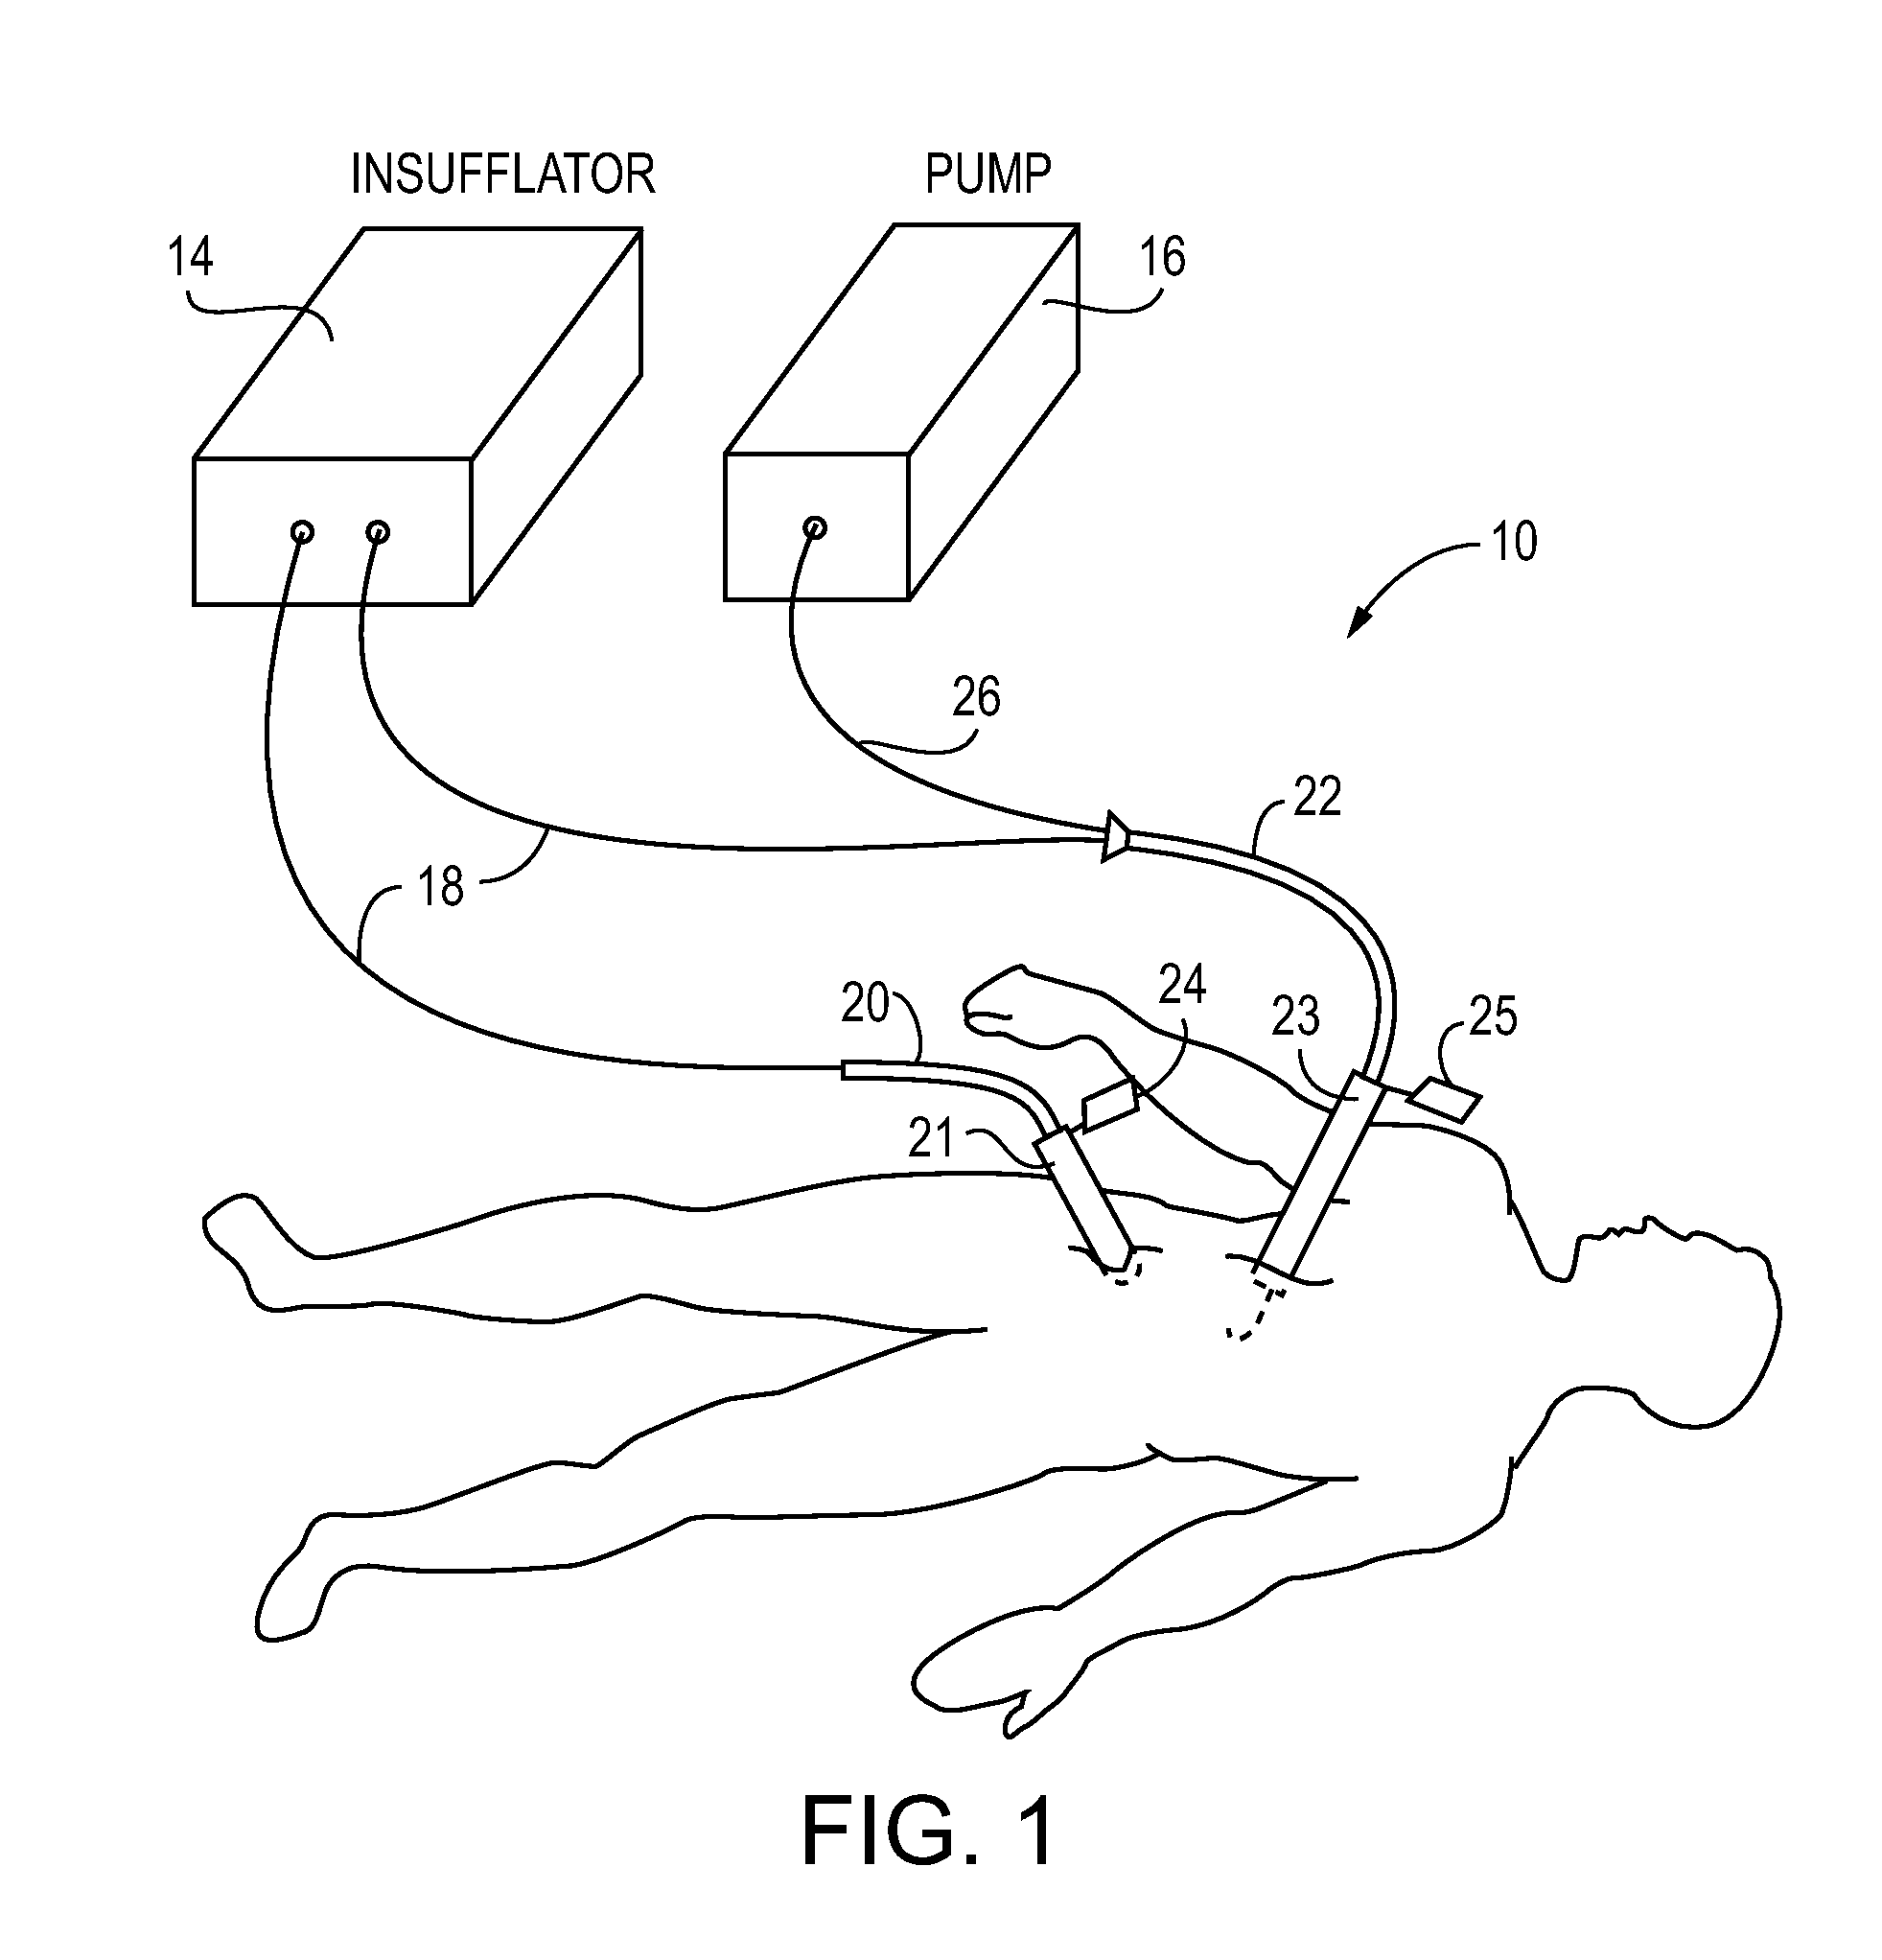 System and method for delivering an Anti-adhesive substance to a body cavity